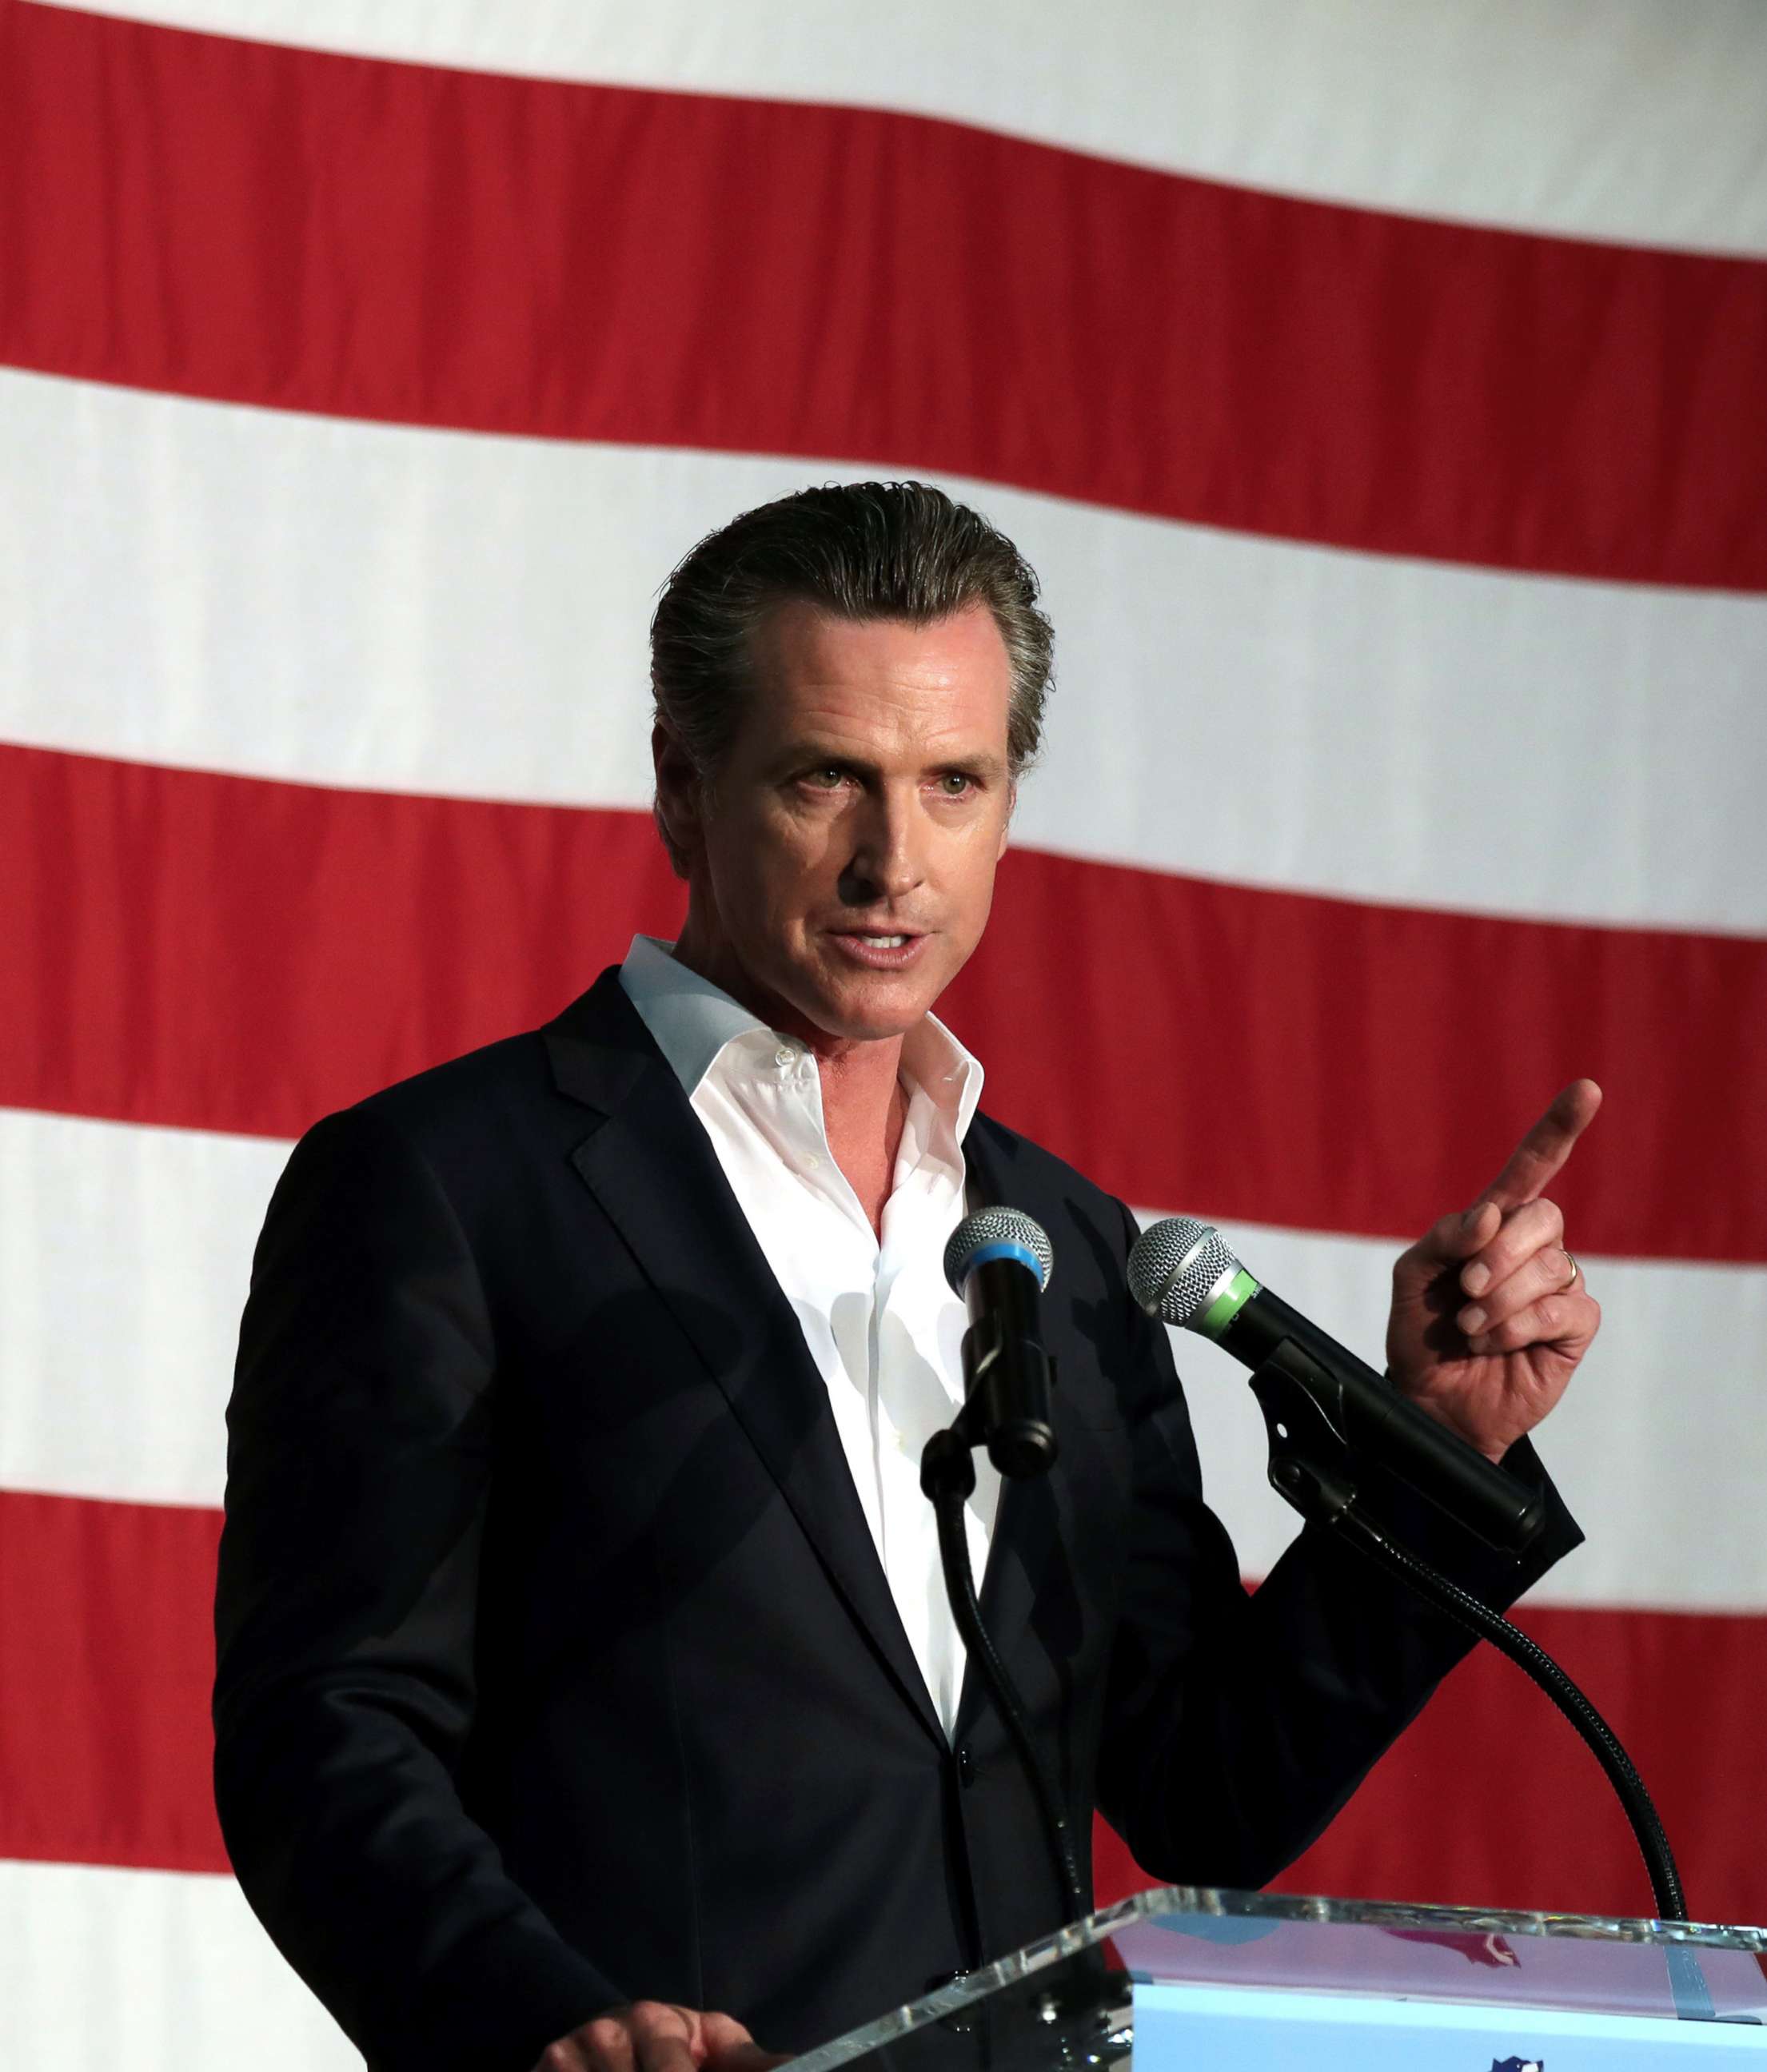 PHOTO: California gubernatorial candidate, Lieutenant Governor Gavin Newsom speaks at a campaign rally in Burbank, Calif., May 30, 2018.